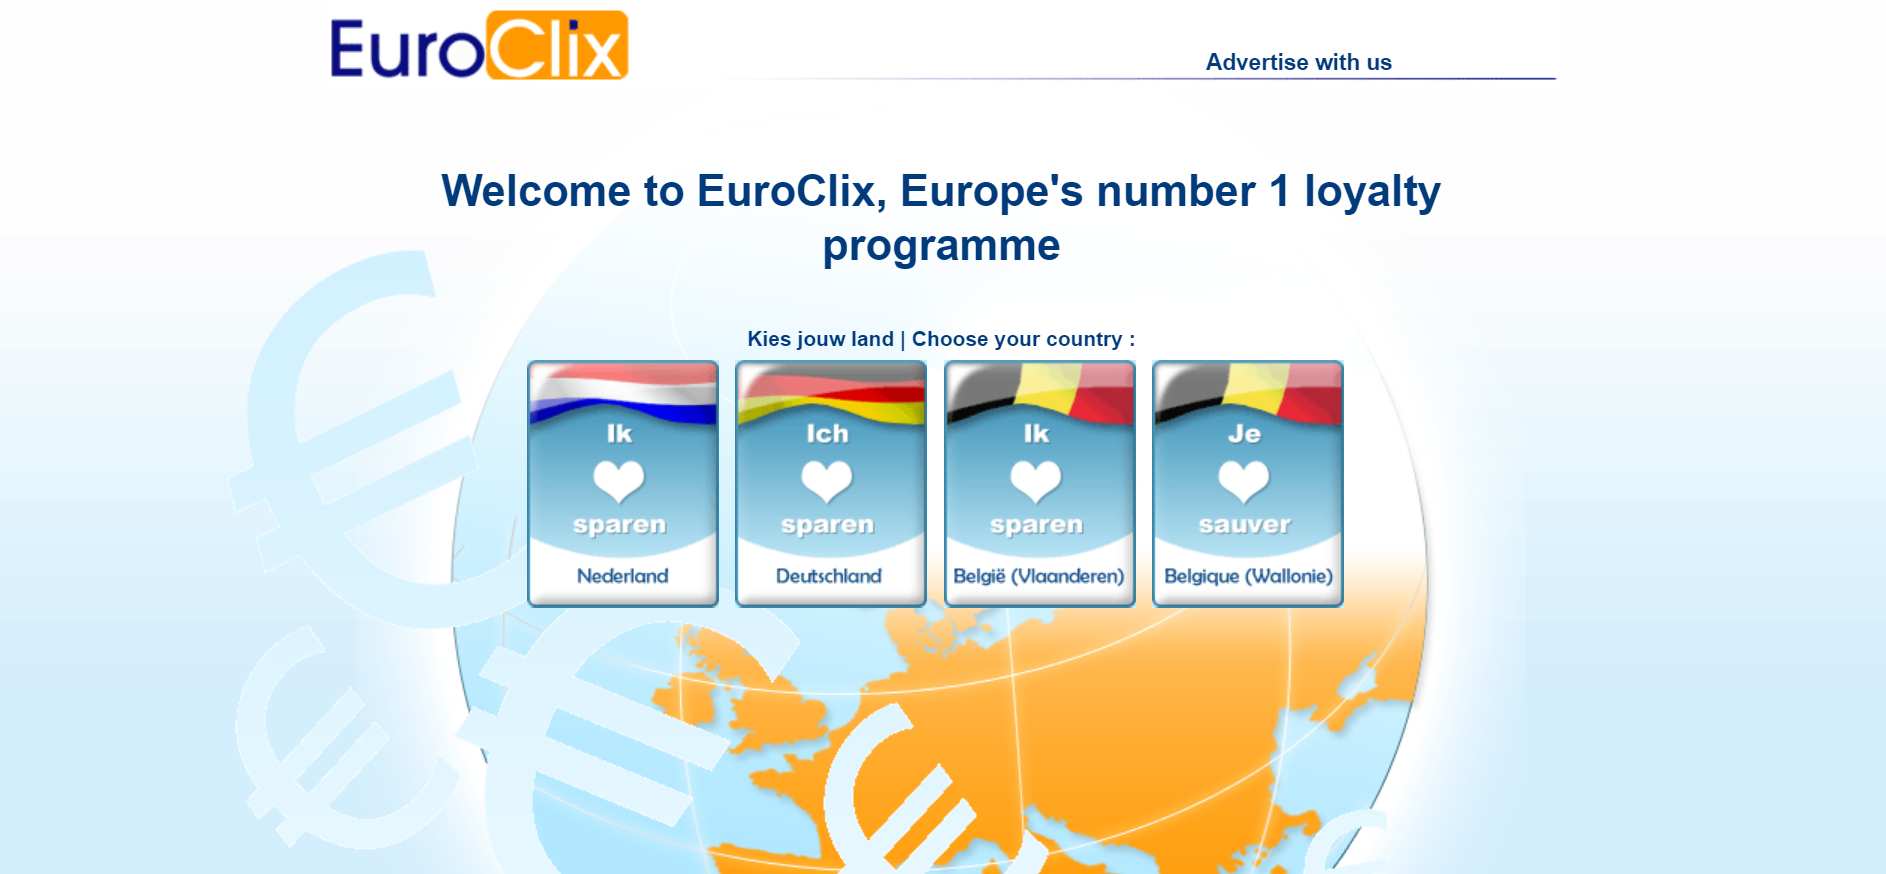 How to make money online e how to get free referrals with Euro Clix